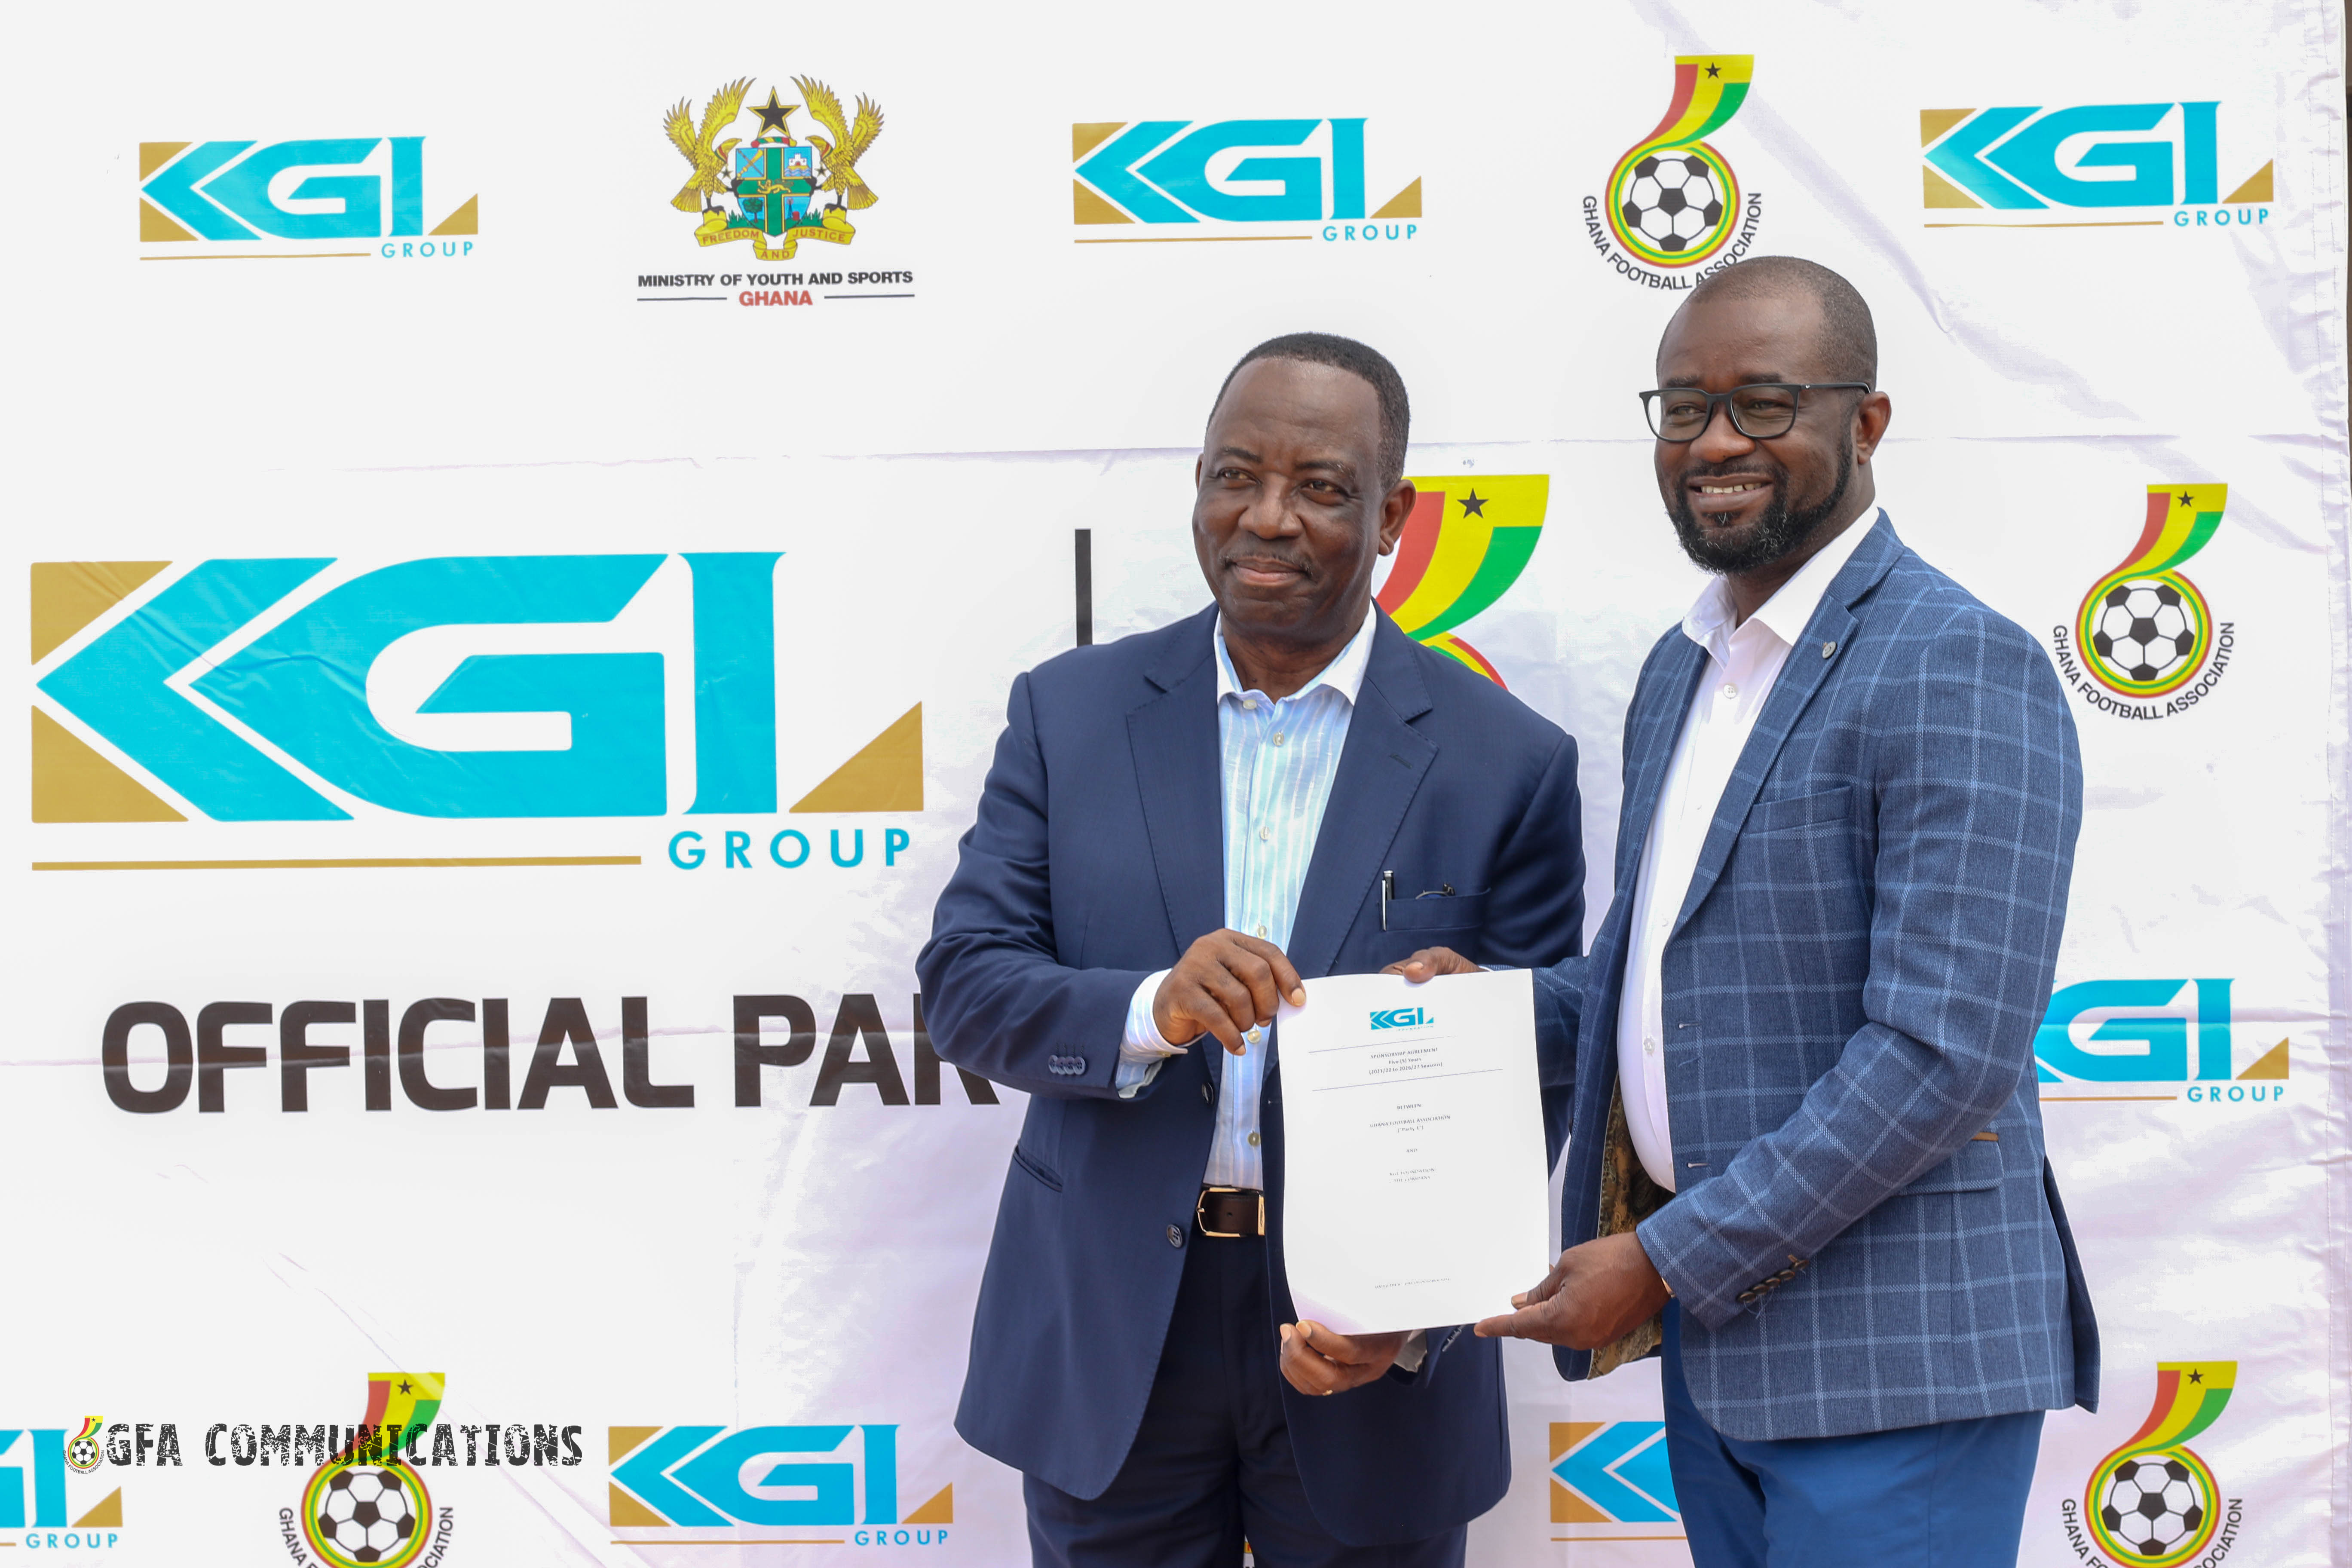 KGL Foundation injects One-Million USD into Juvenile football for 5 years